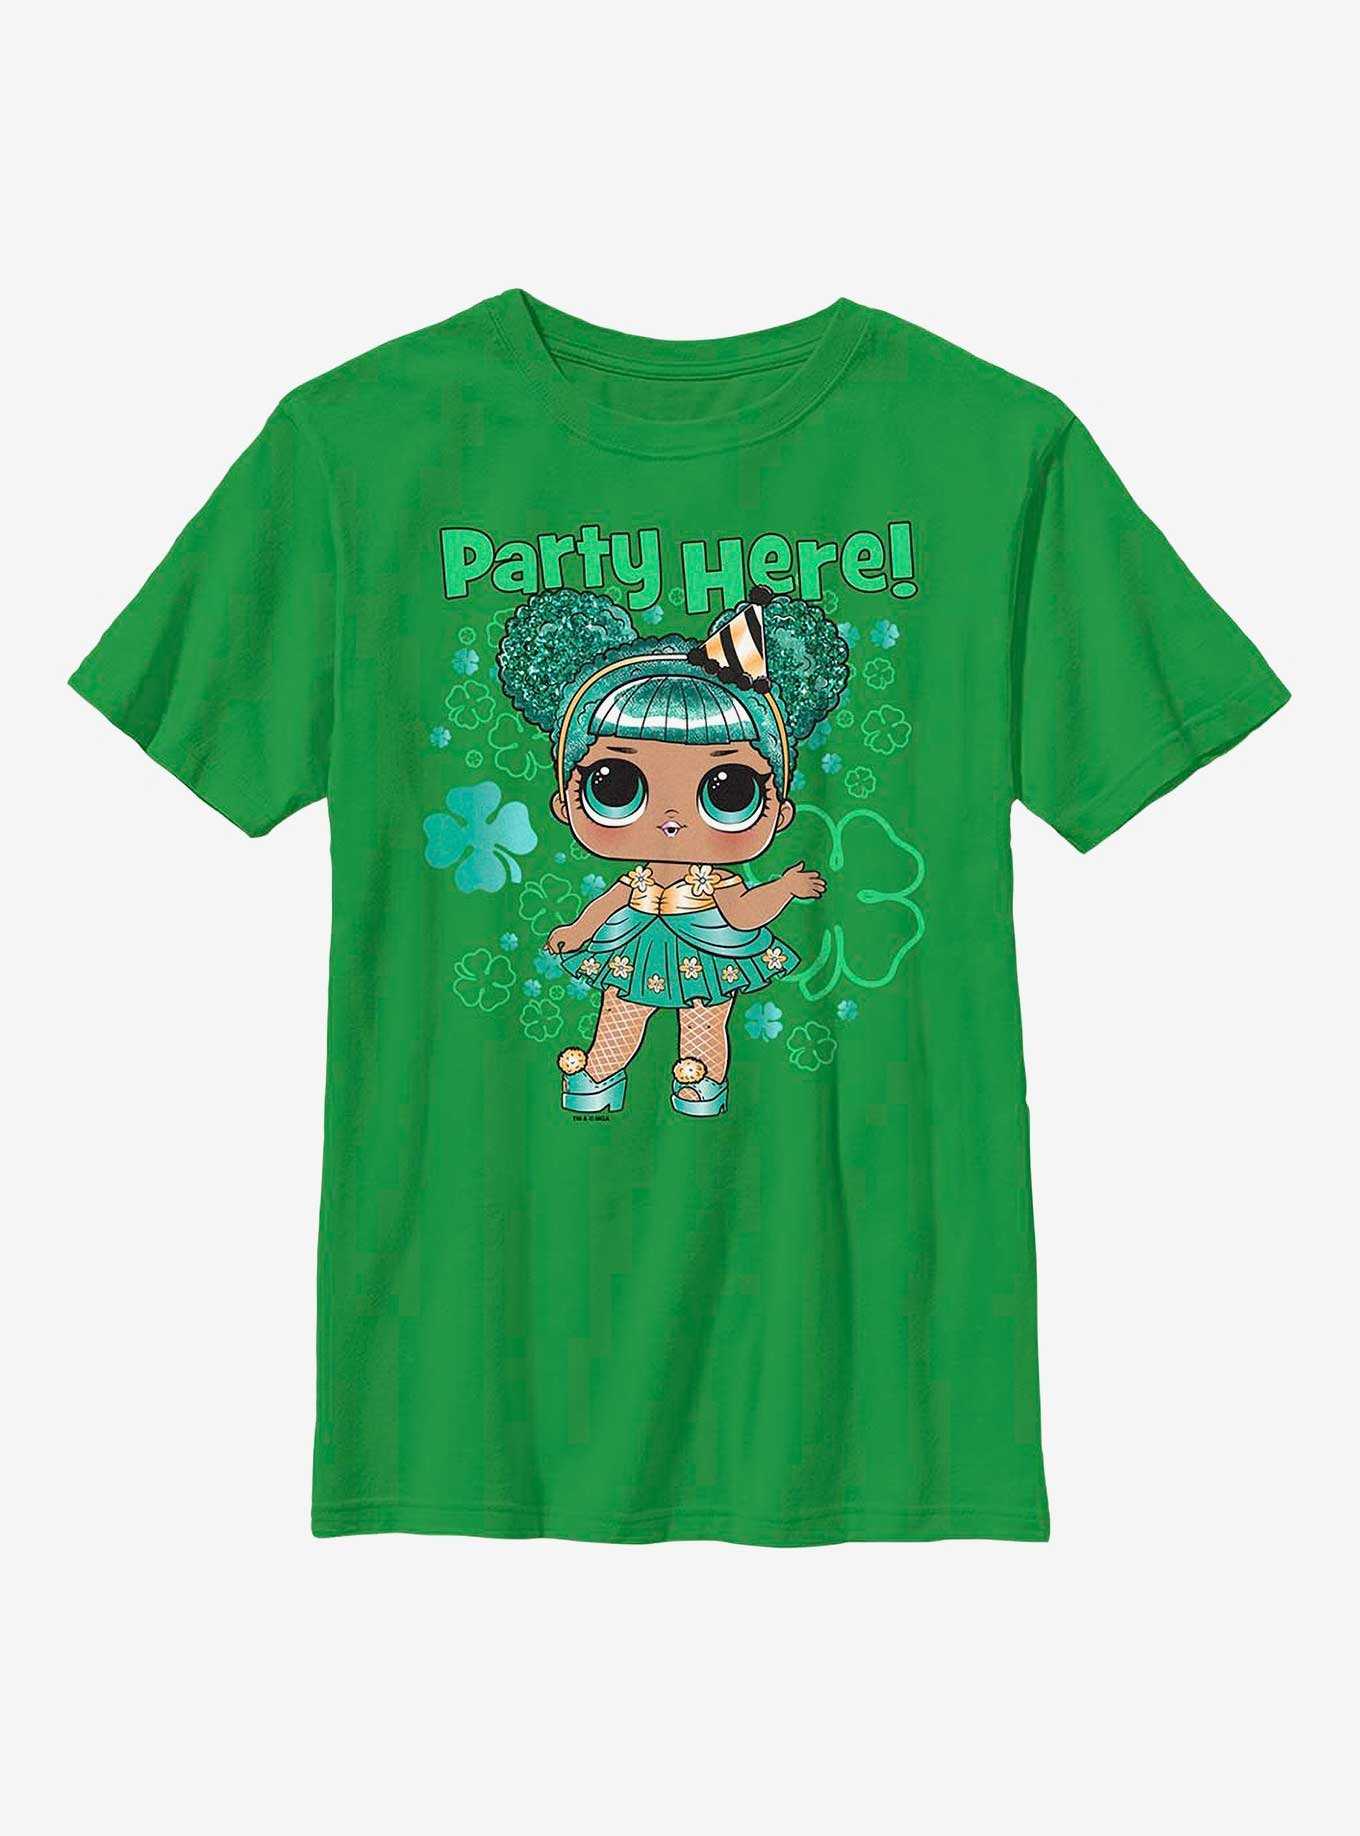 L.O.L. Surprise Party Here Youth T-Shirt, , hi-res